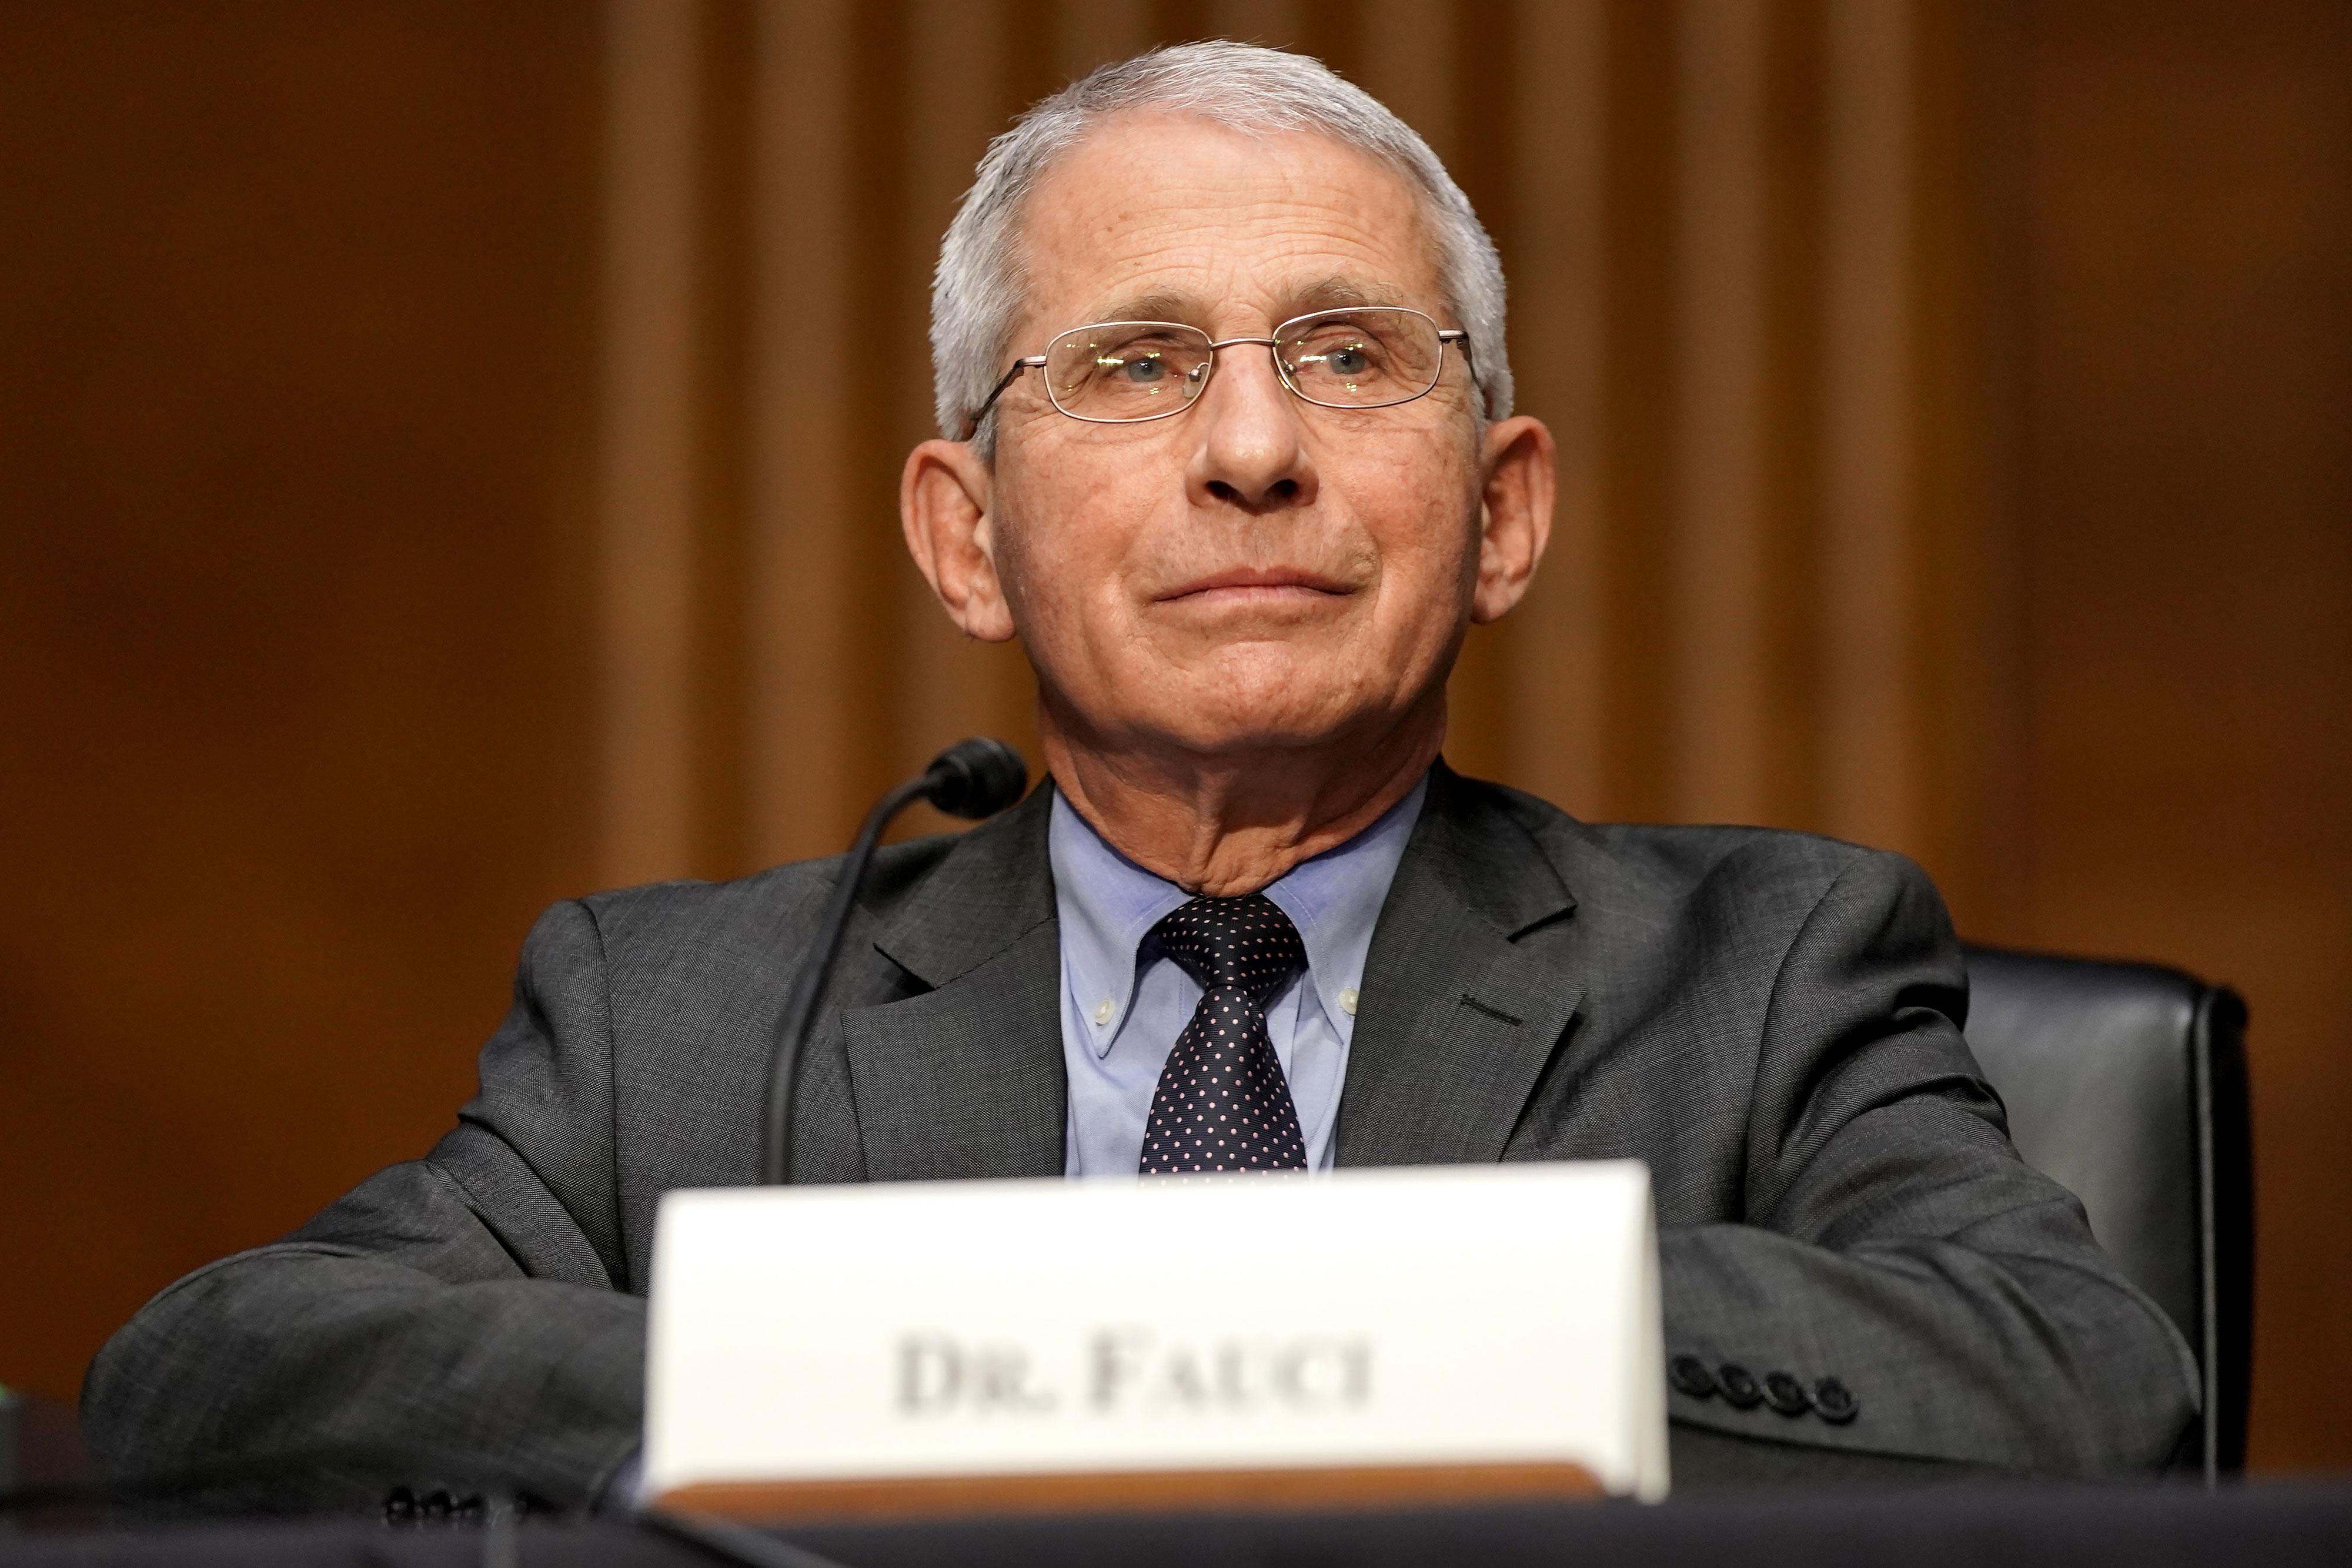 Dr. Anthony Fauci, director of the National Institute of Allergy and Infectious Diseases, speaks at a hearing in Washington, DC, on May 11, 2021.